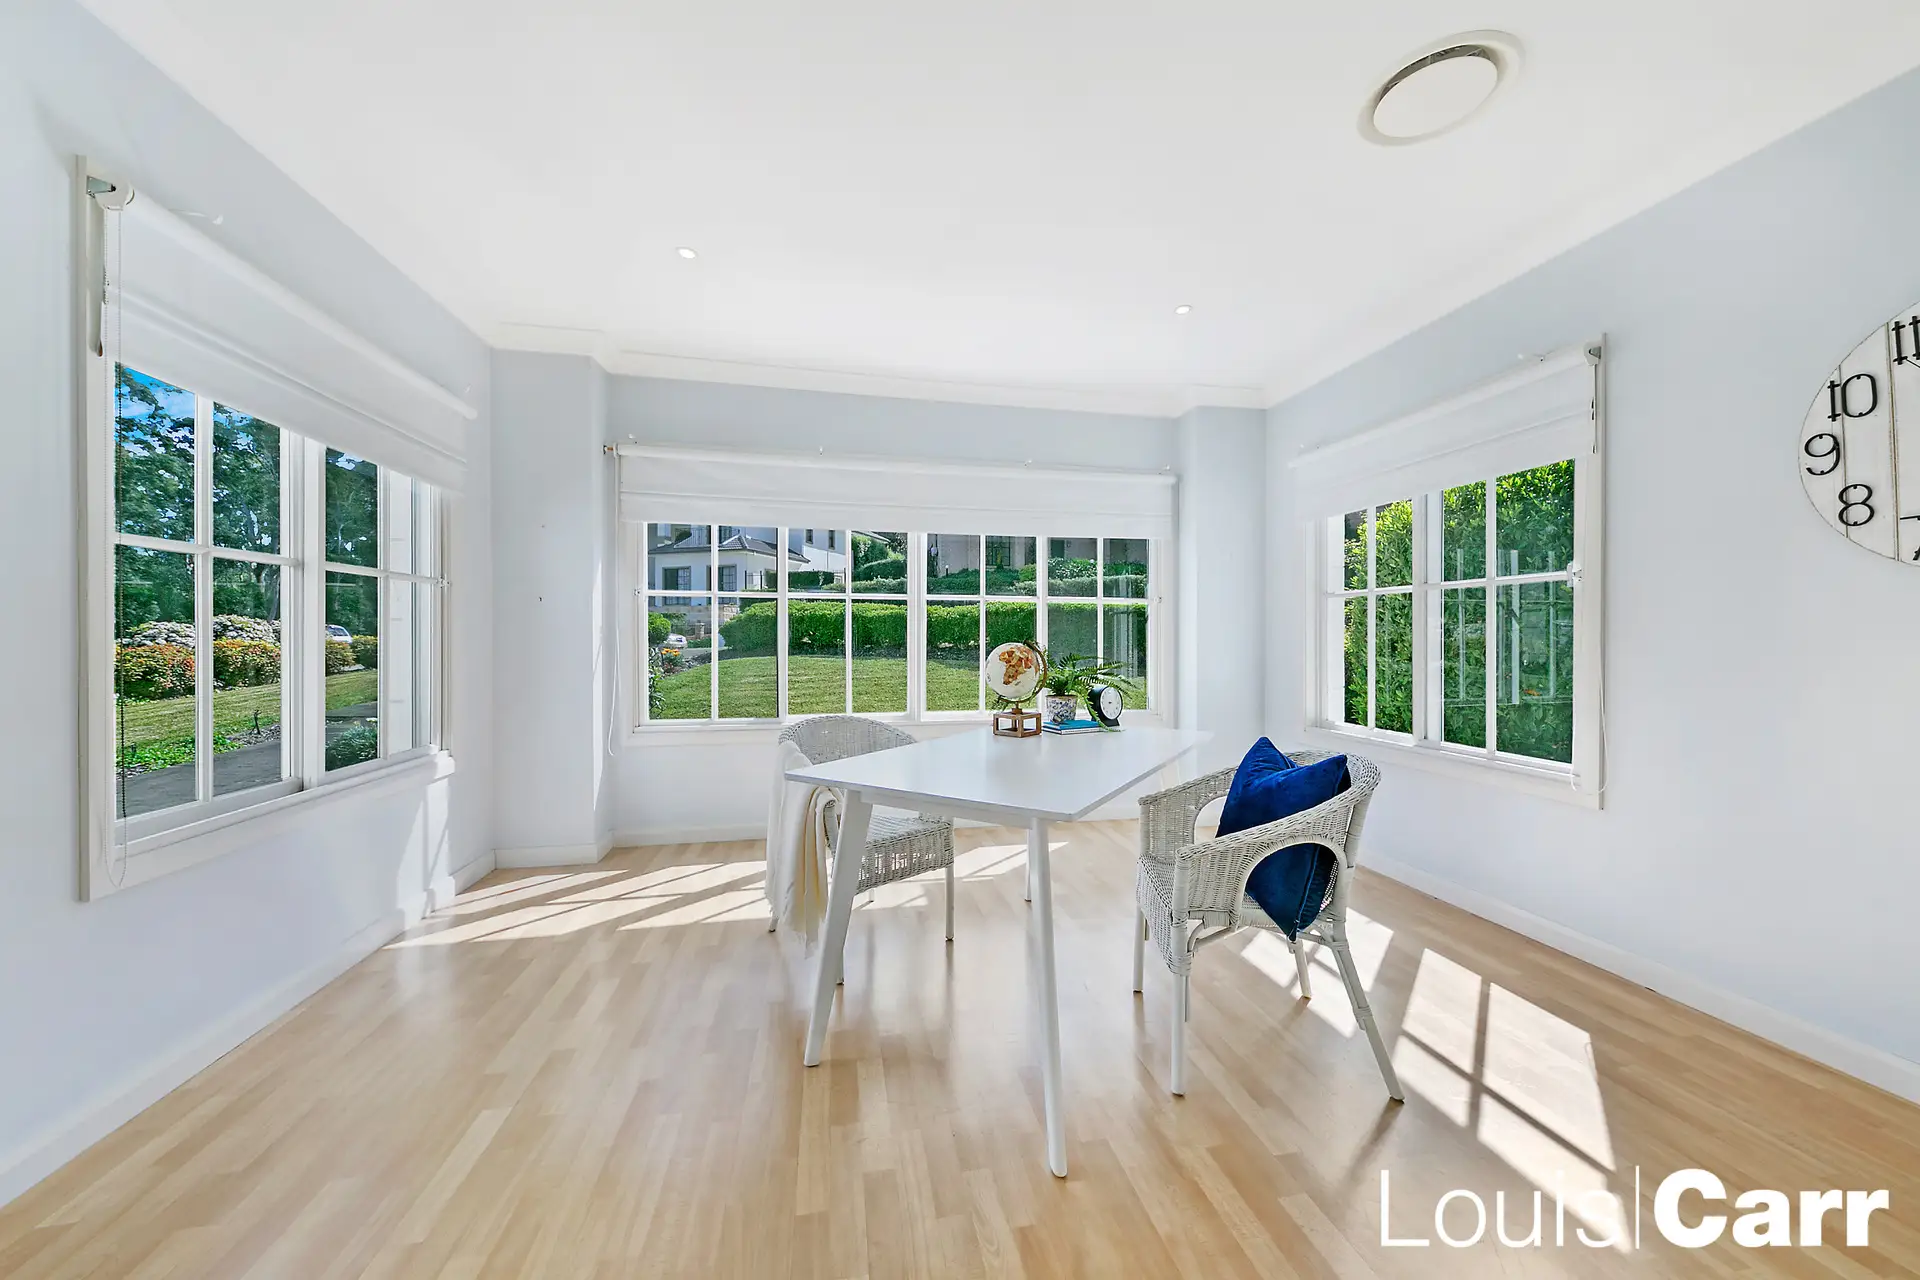 Photo #4: 22 Huntingdale Circle, Castle Hill - Sold by Louis Carr Real Estate